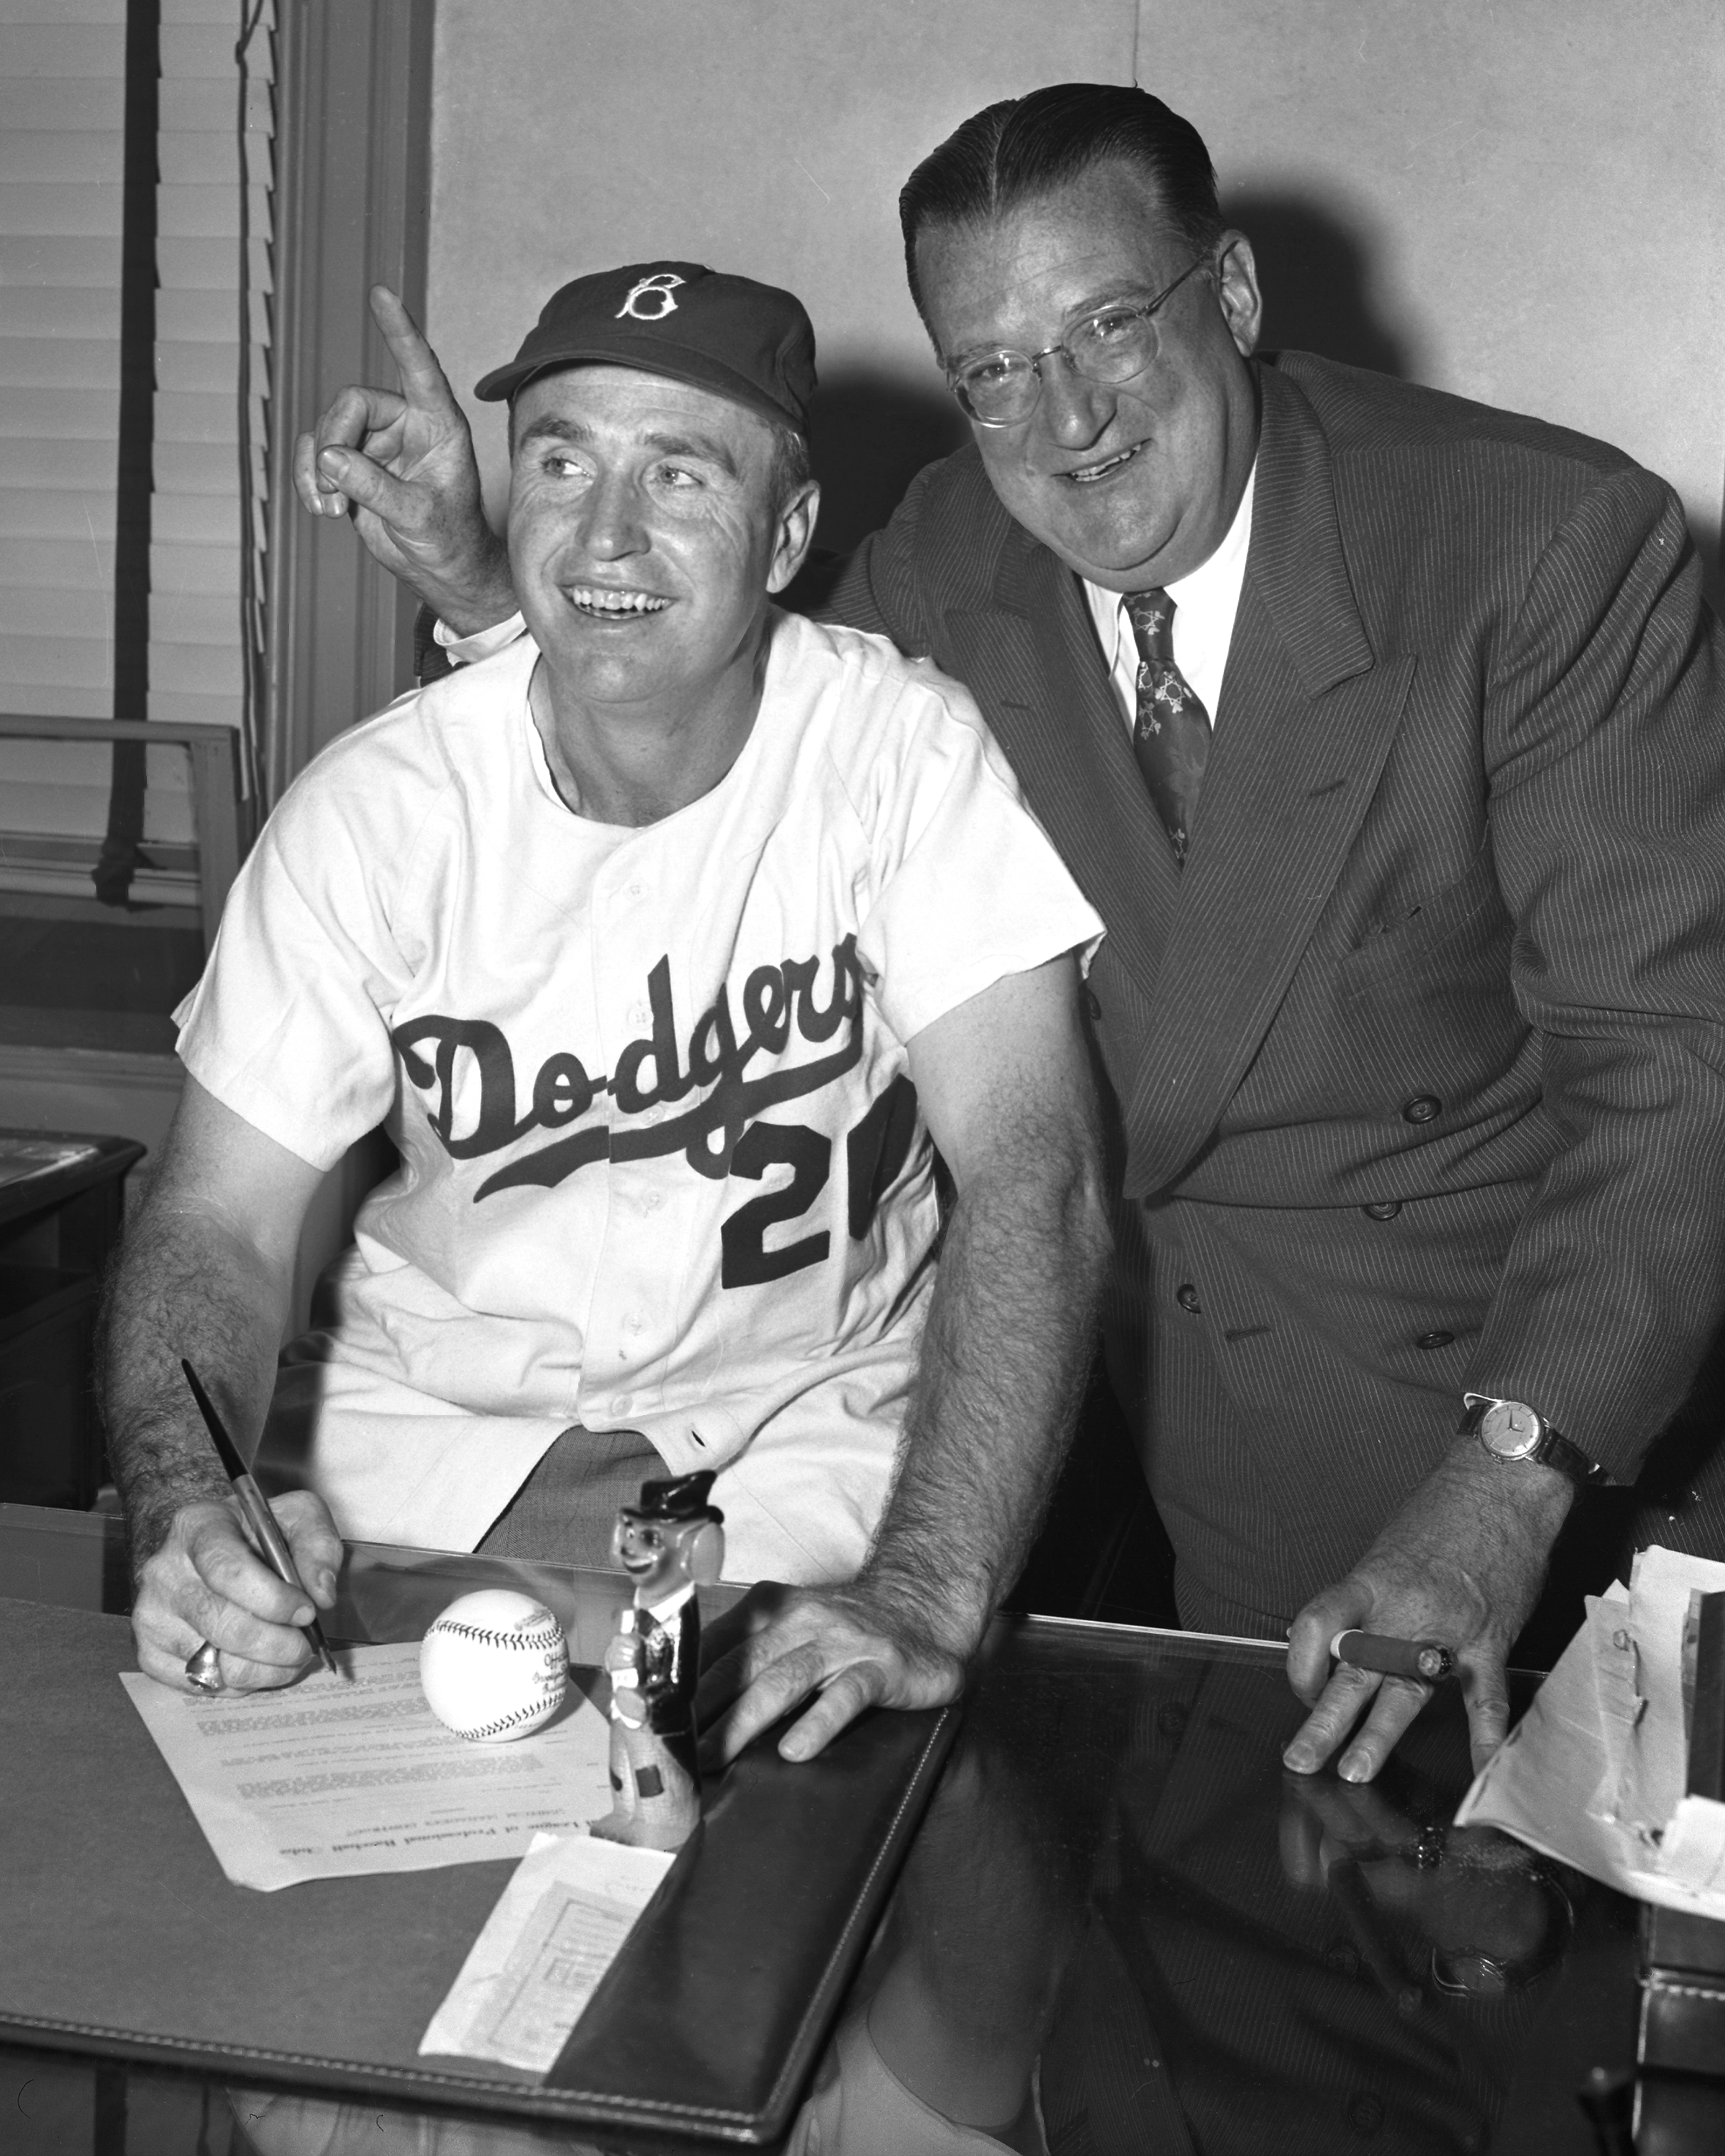 Walt Alston, when he was hired as Brooklyn Dodgers manager on November 24, 1953 (wearing No. 20), along with team owner Walter O’Malley.